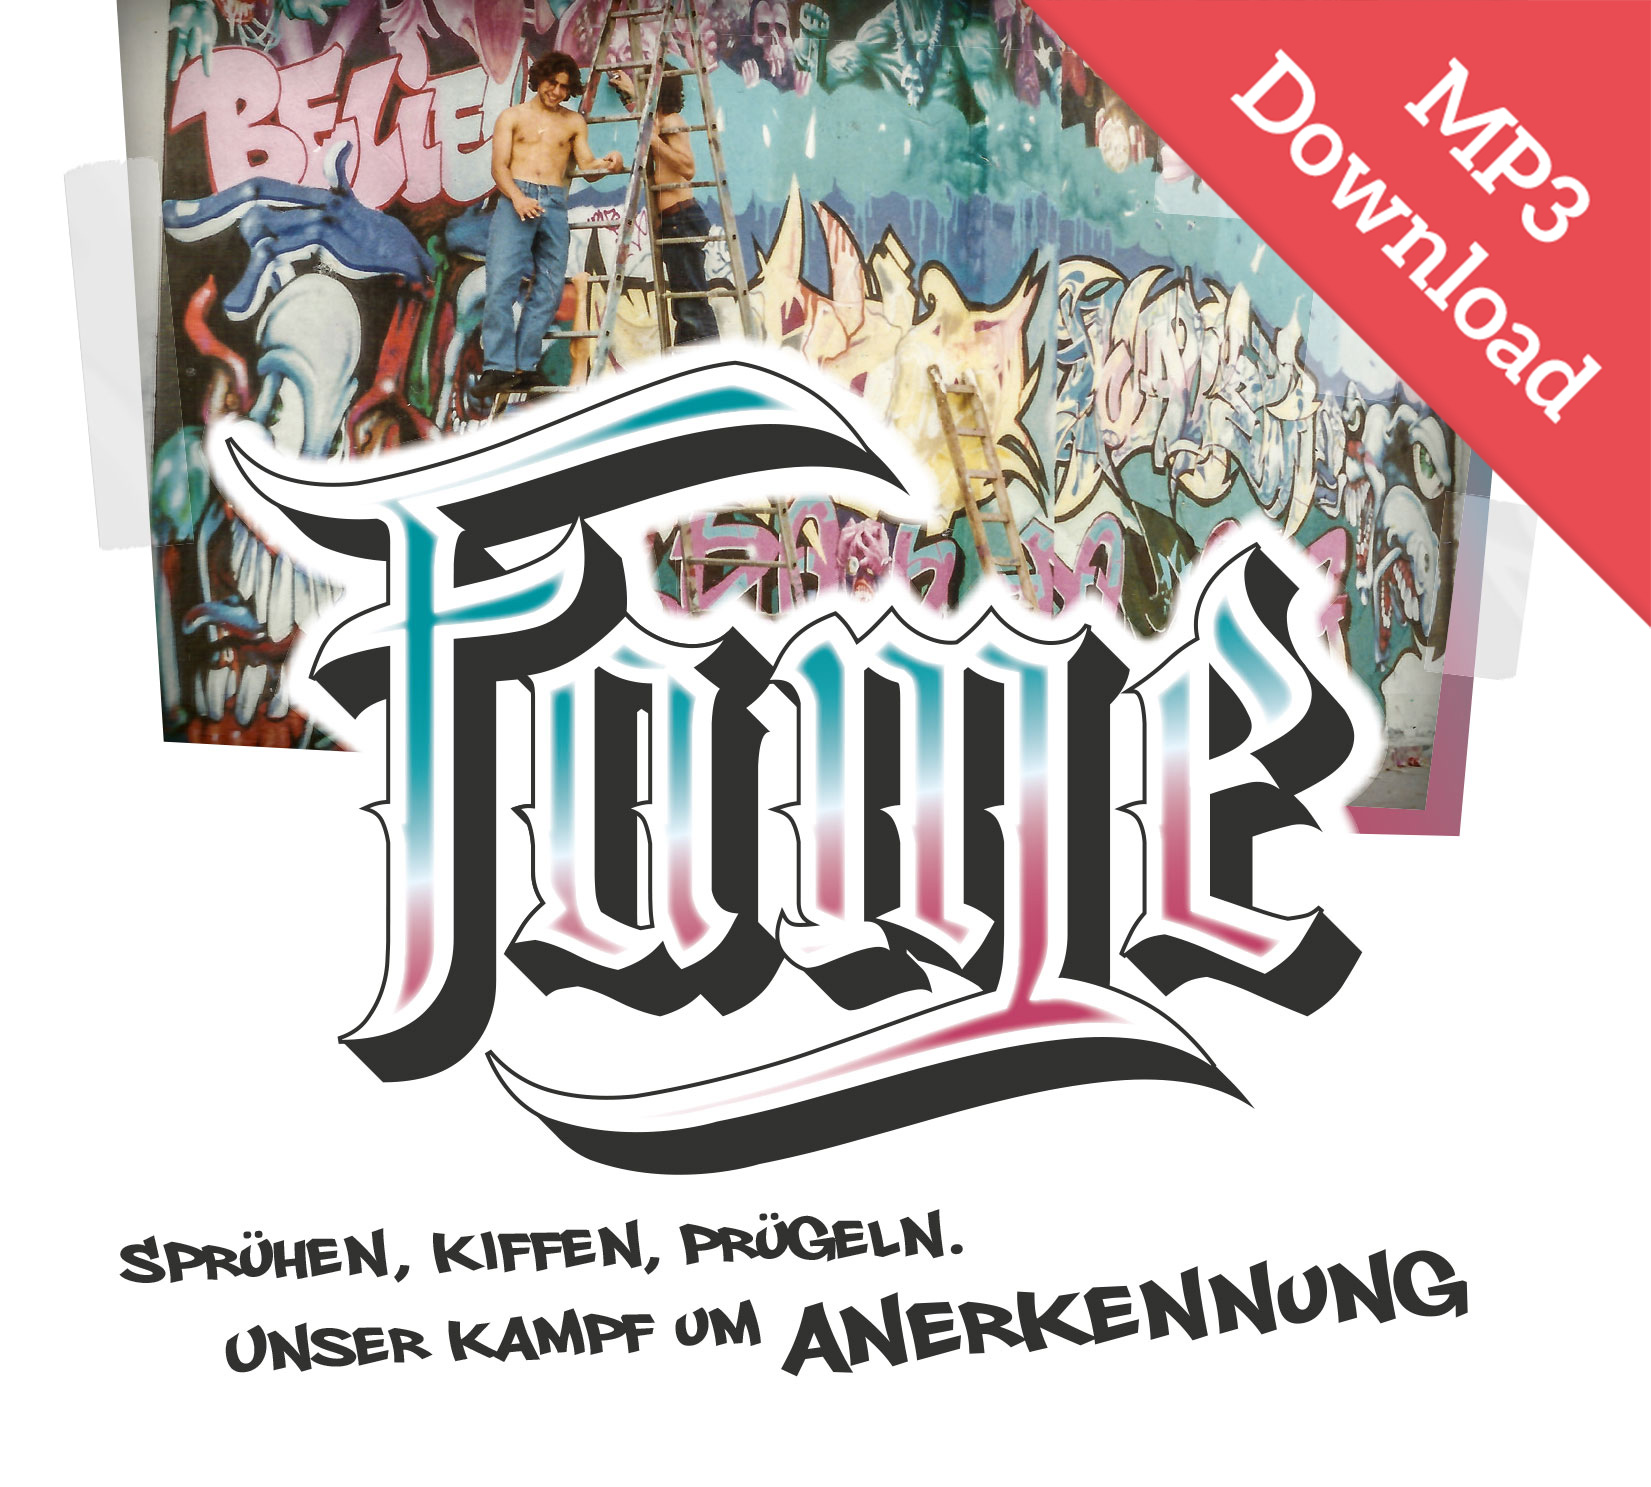 DOWNLOAD: Fame (Hörbuch [MP3])